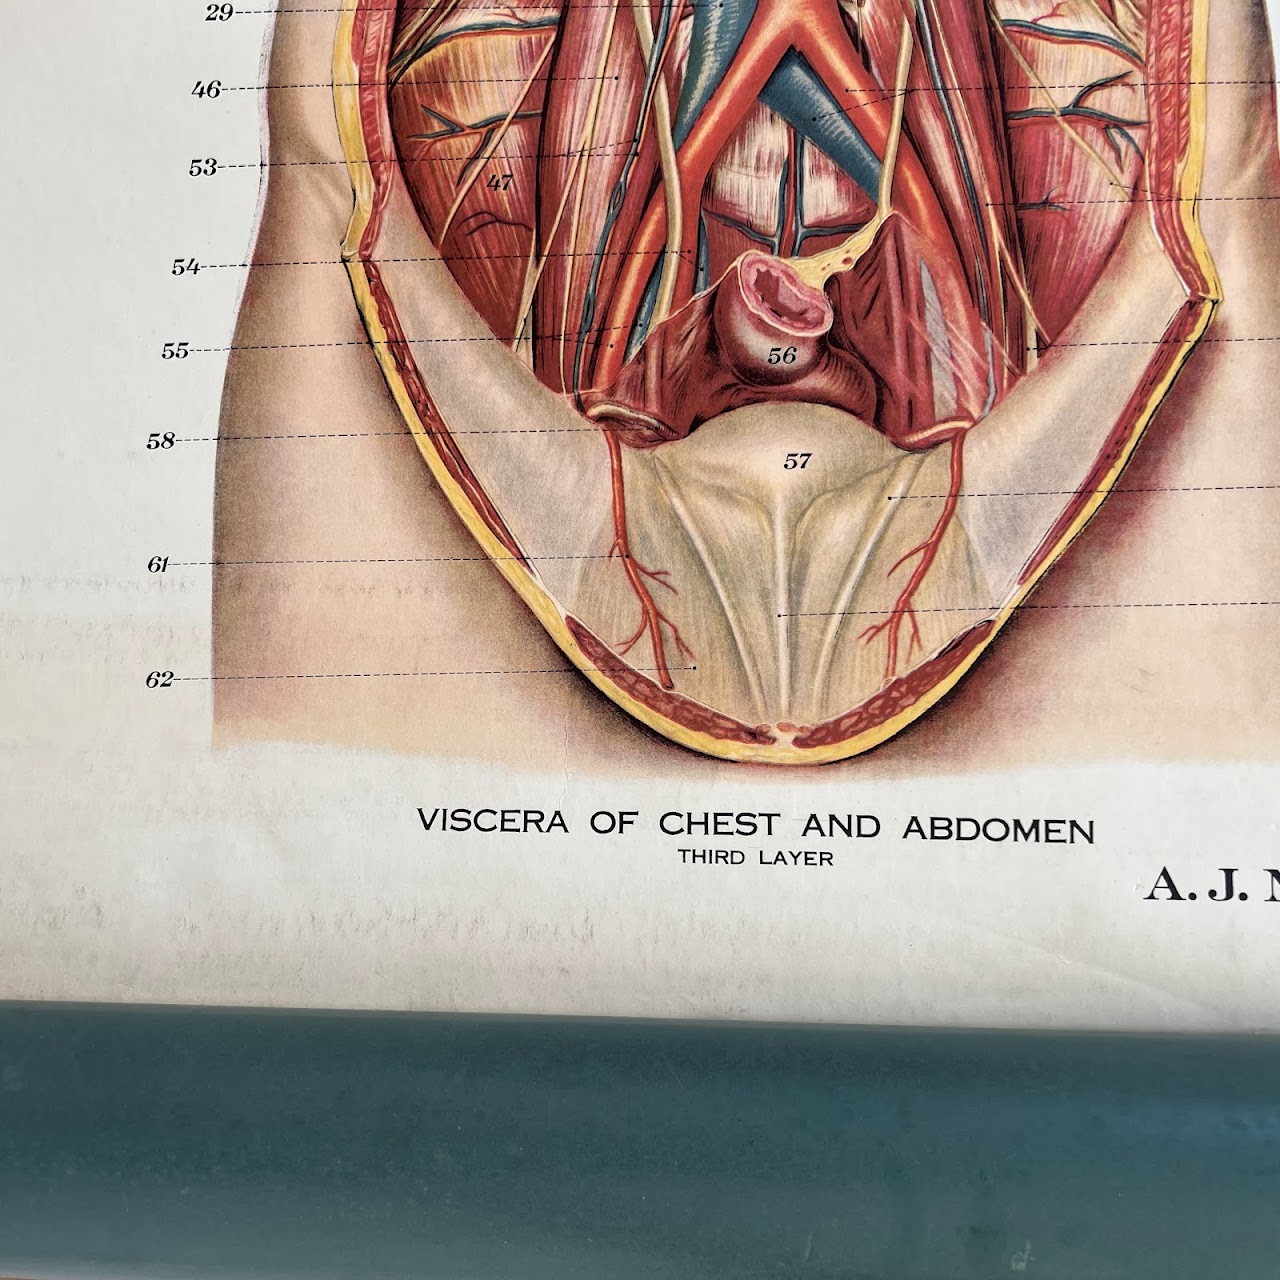 American Frohse Max Brodel Thoracic and Abdominal Viscera Anatomy Chart, 1918